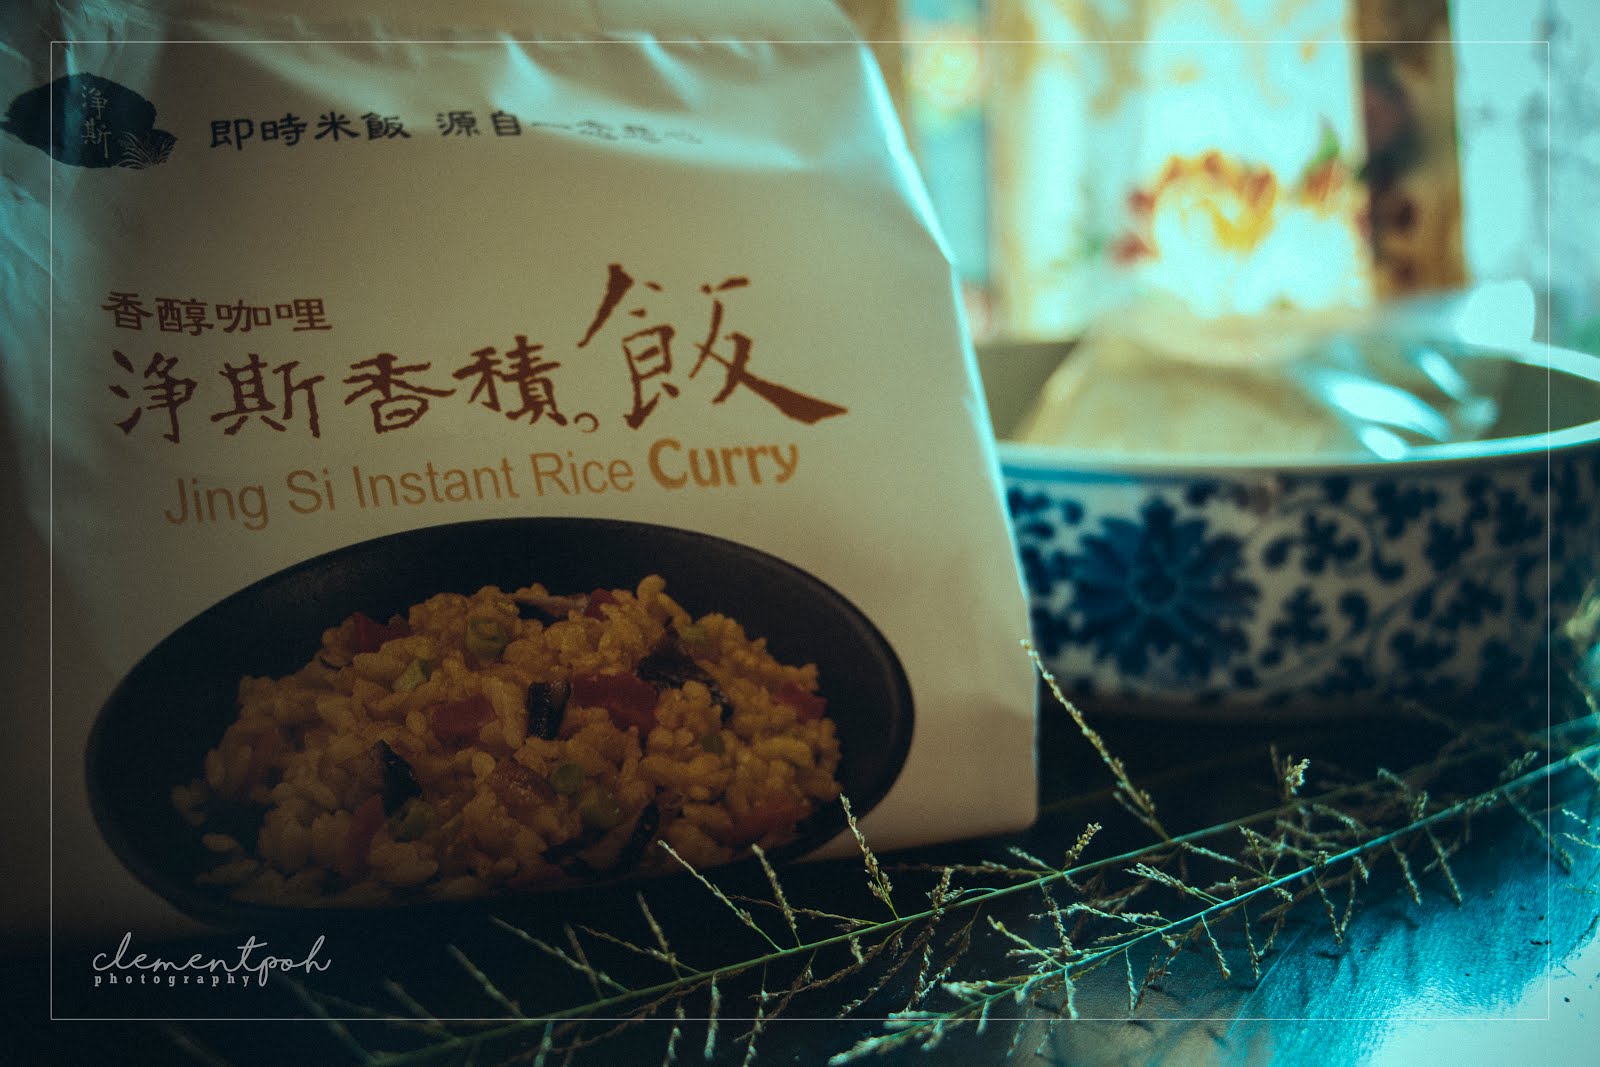 Jing Si Instant Rice Curry